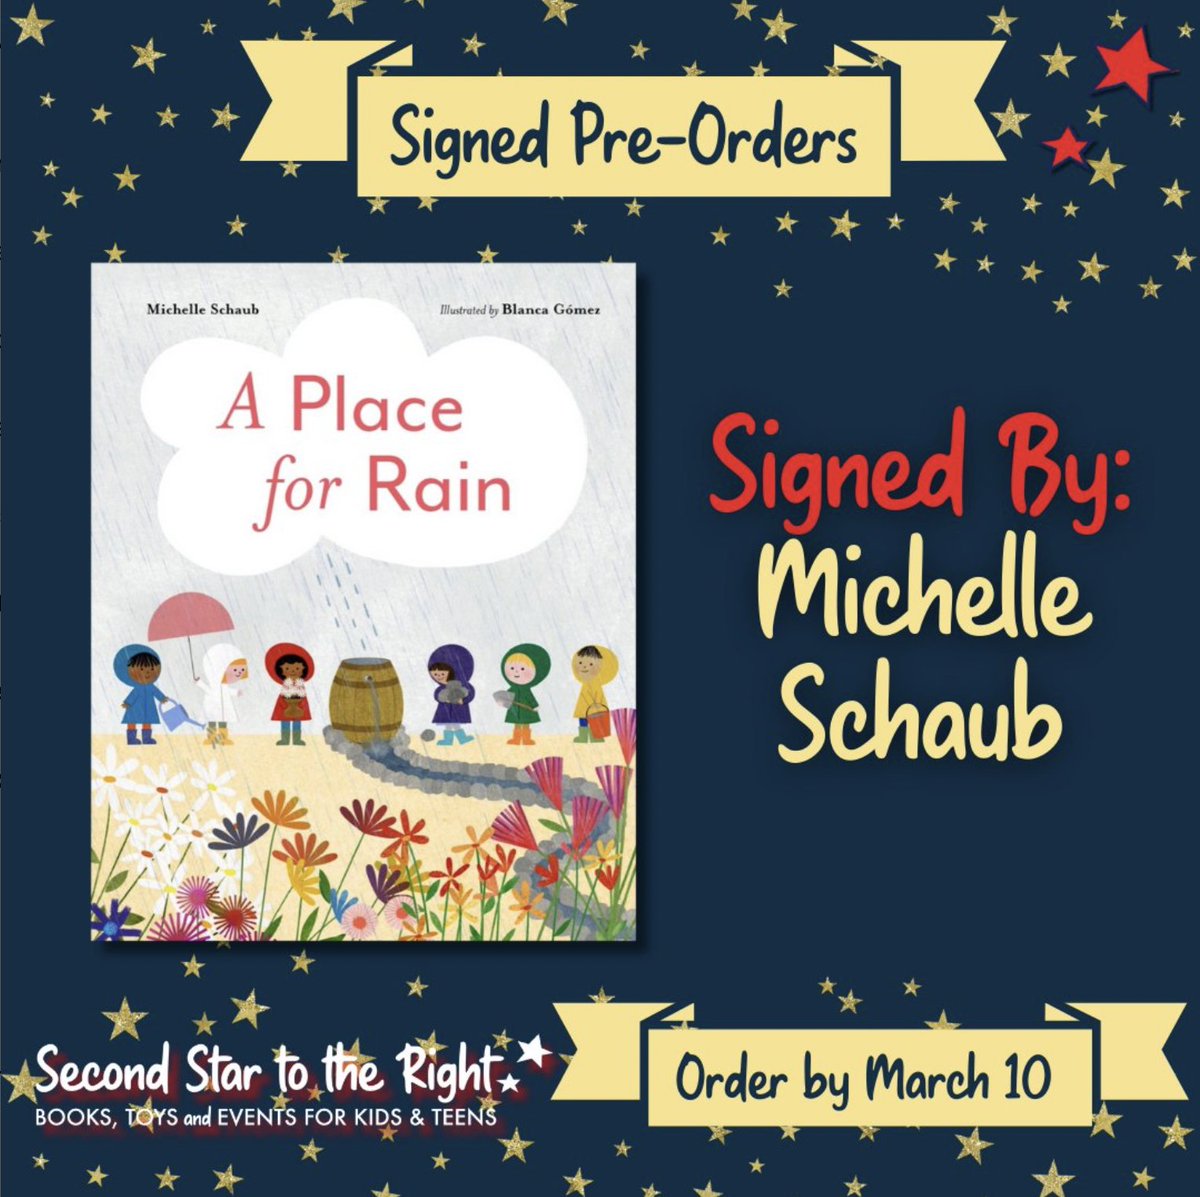 Still plenty of time to preorder your signed copy of A PLACE FOR RAIN from @SecondStarBooks ! secondstartotherightbooks.com/book/978132405… @NYRBooks @StormLiterary #raingardens @SteamTeamBooks